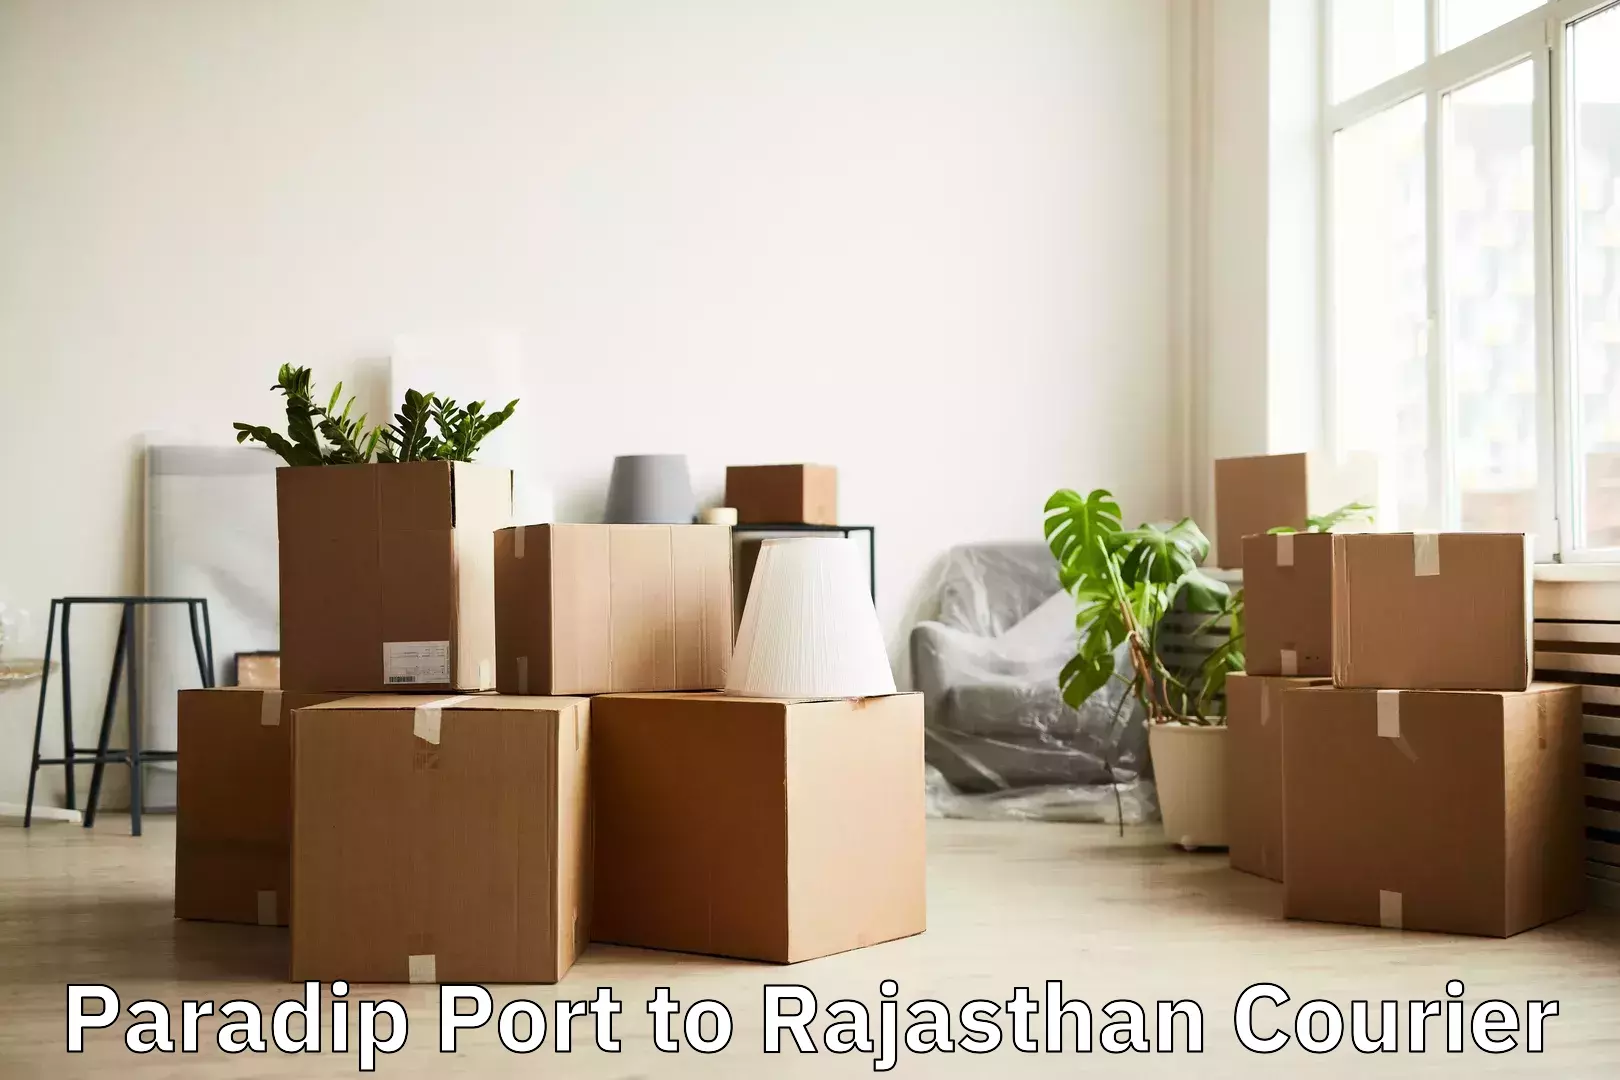 Overnight baggage shipping in Paradip Port to Rajasthan